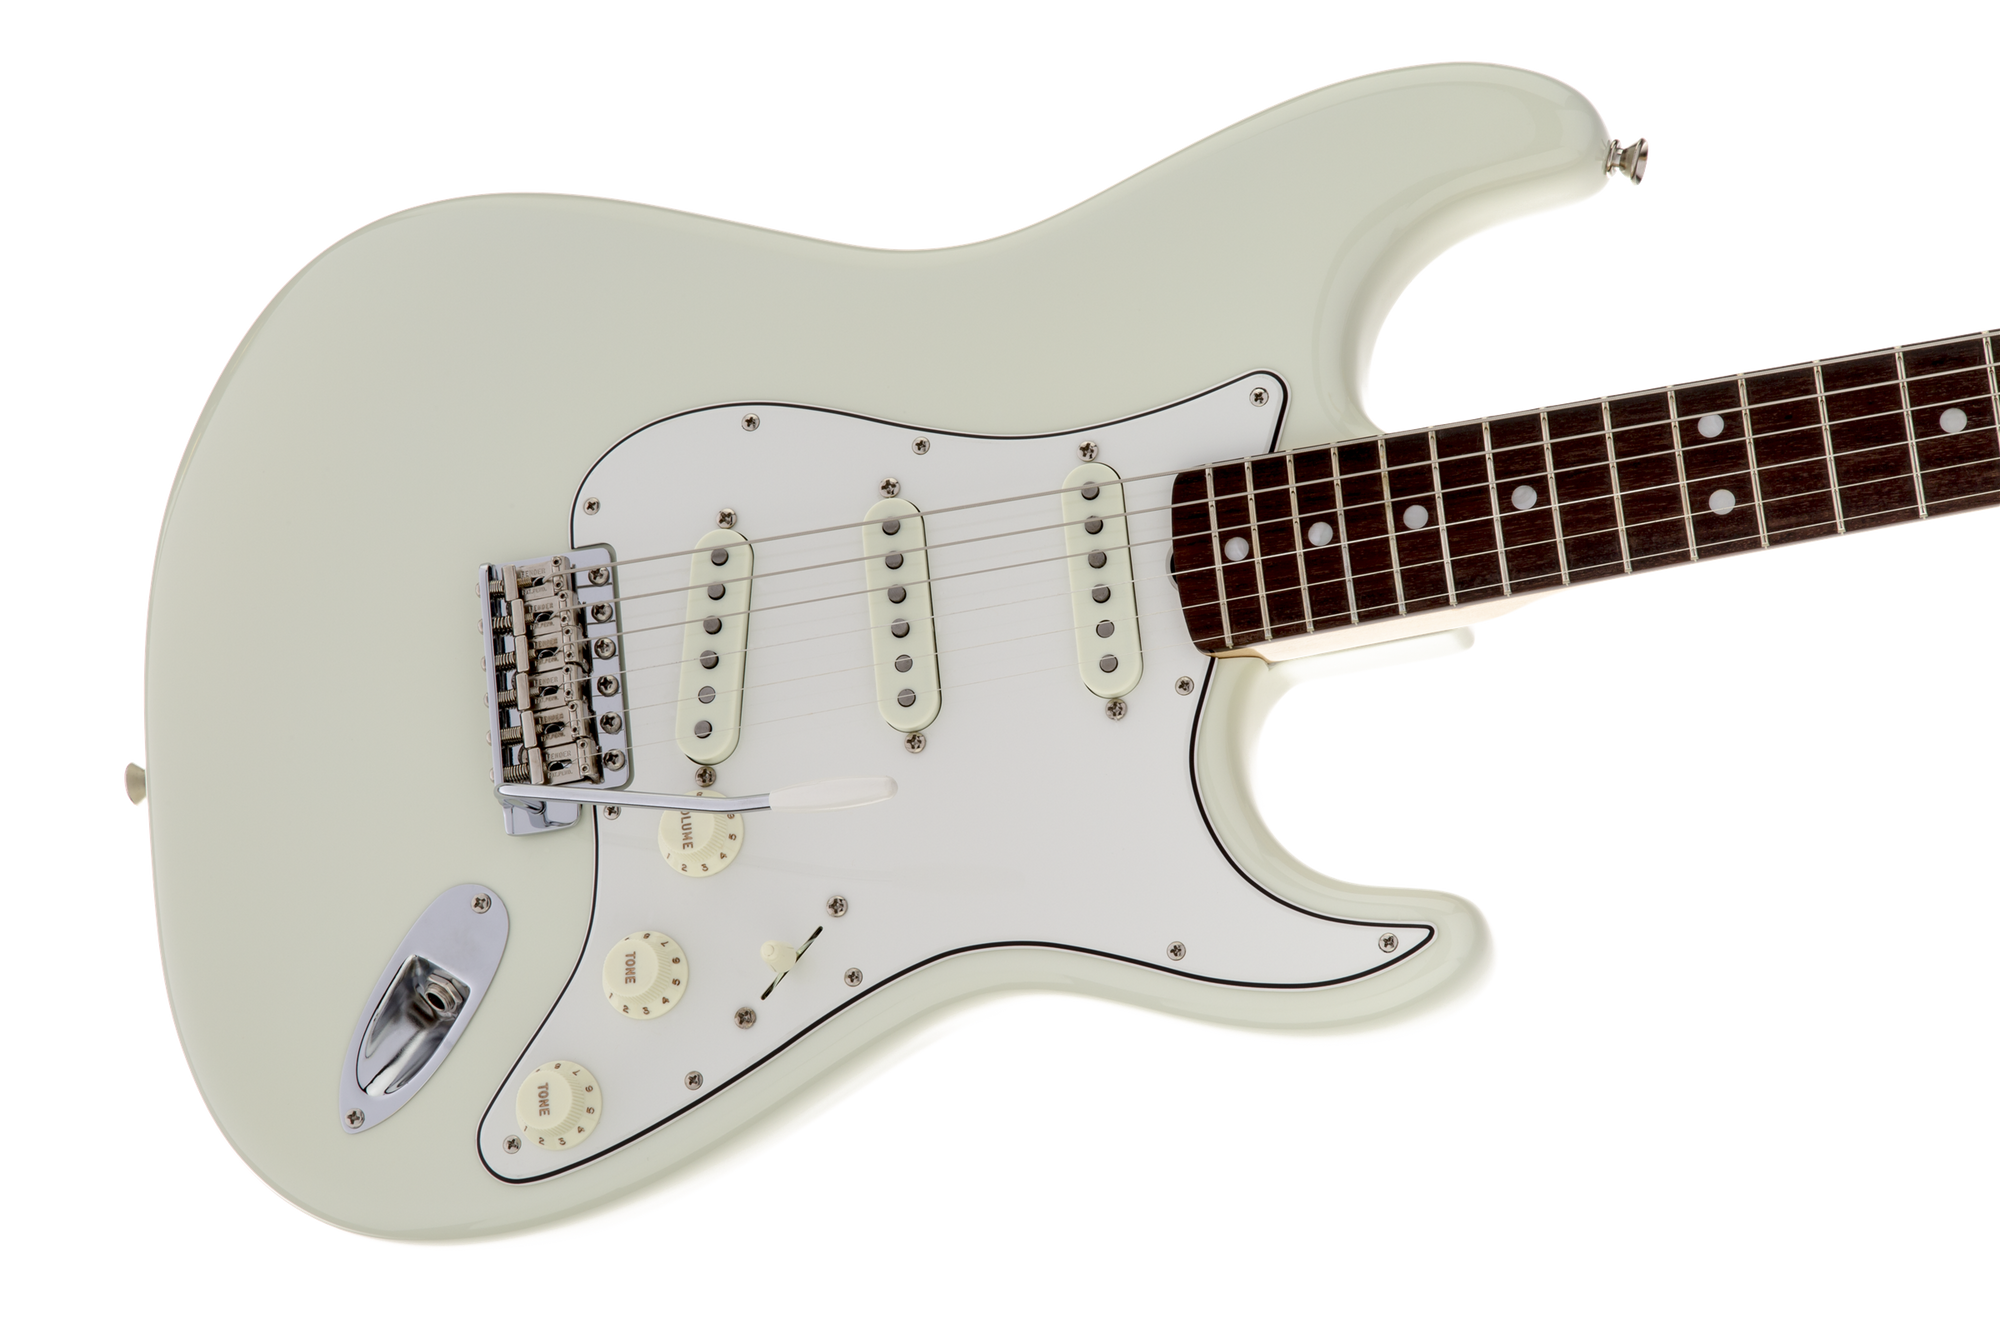 American Vintage '65 Stratocasters Olympic White